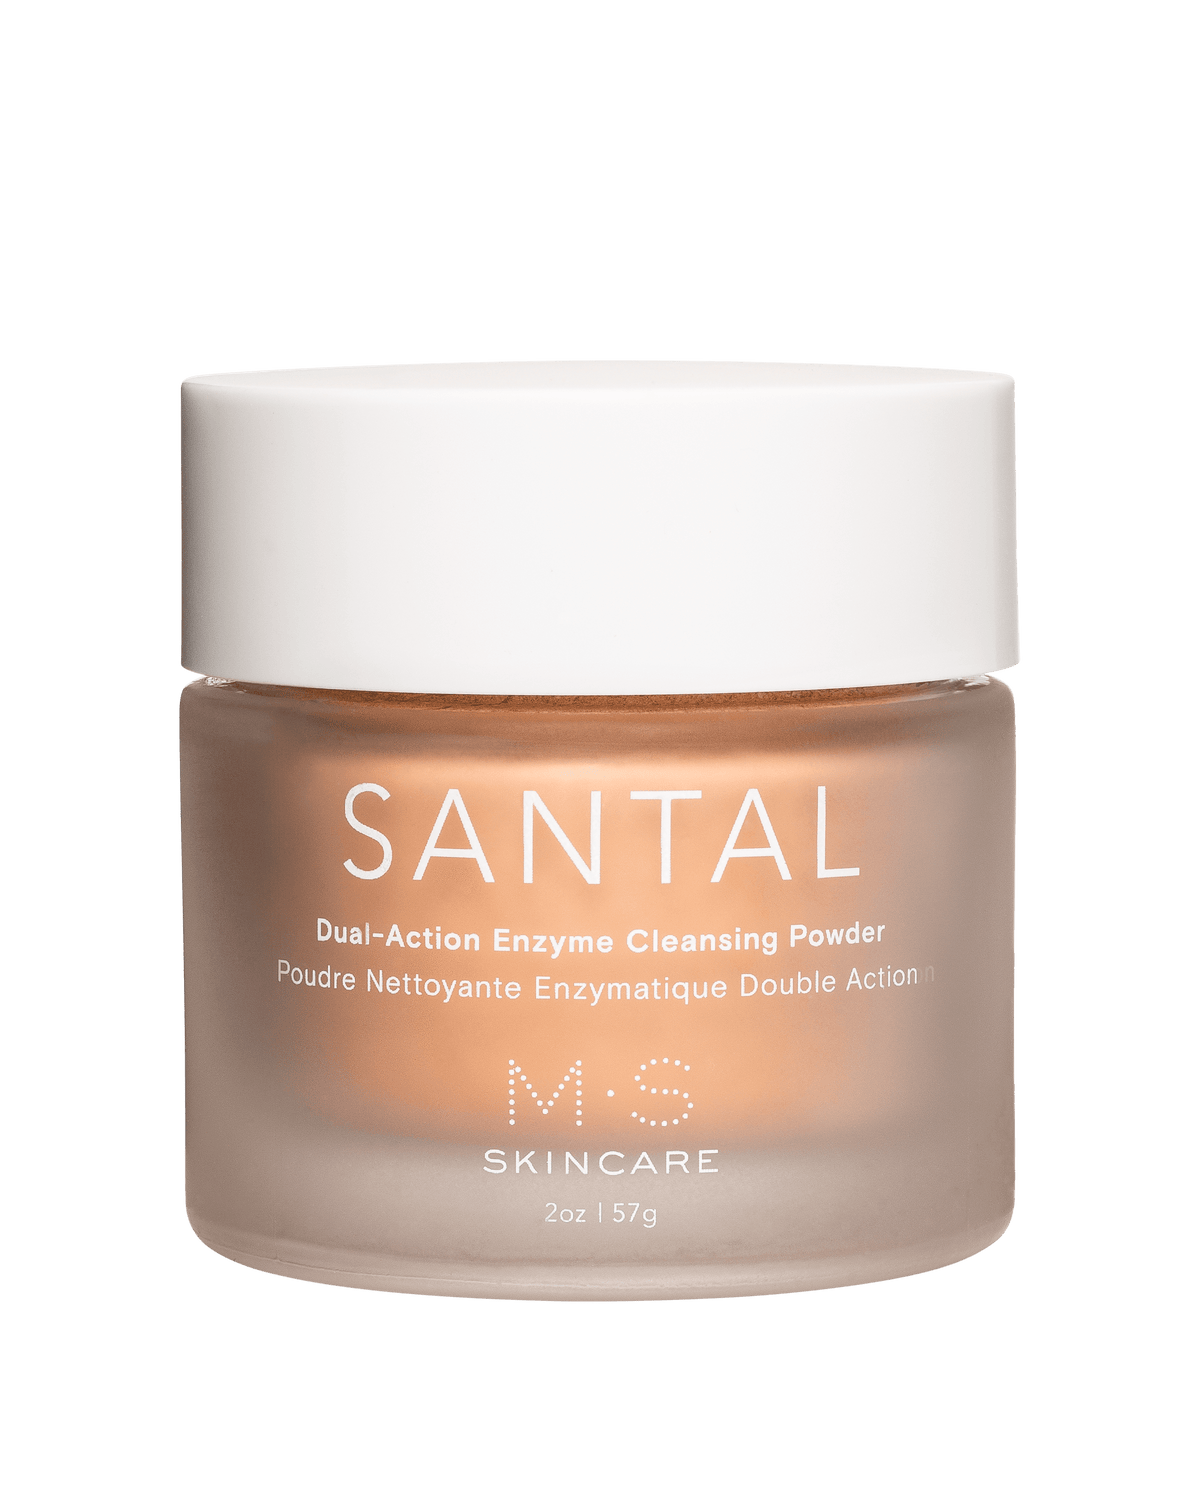 SANTAL Dual-Action Enzyme Cleansing Powder